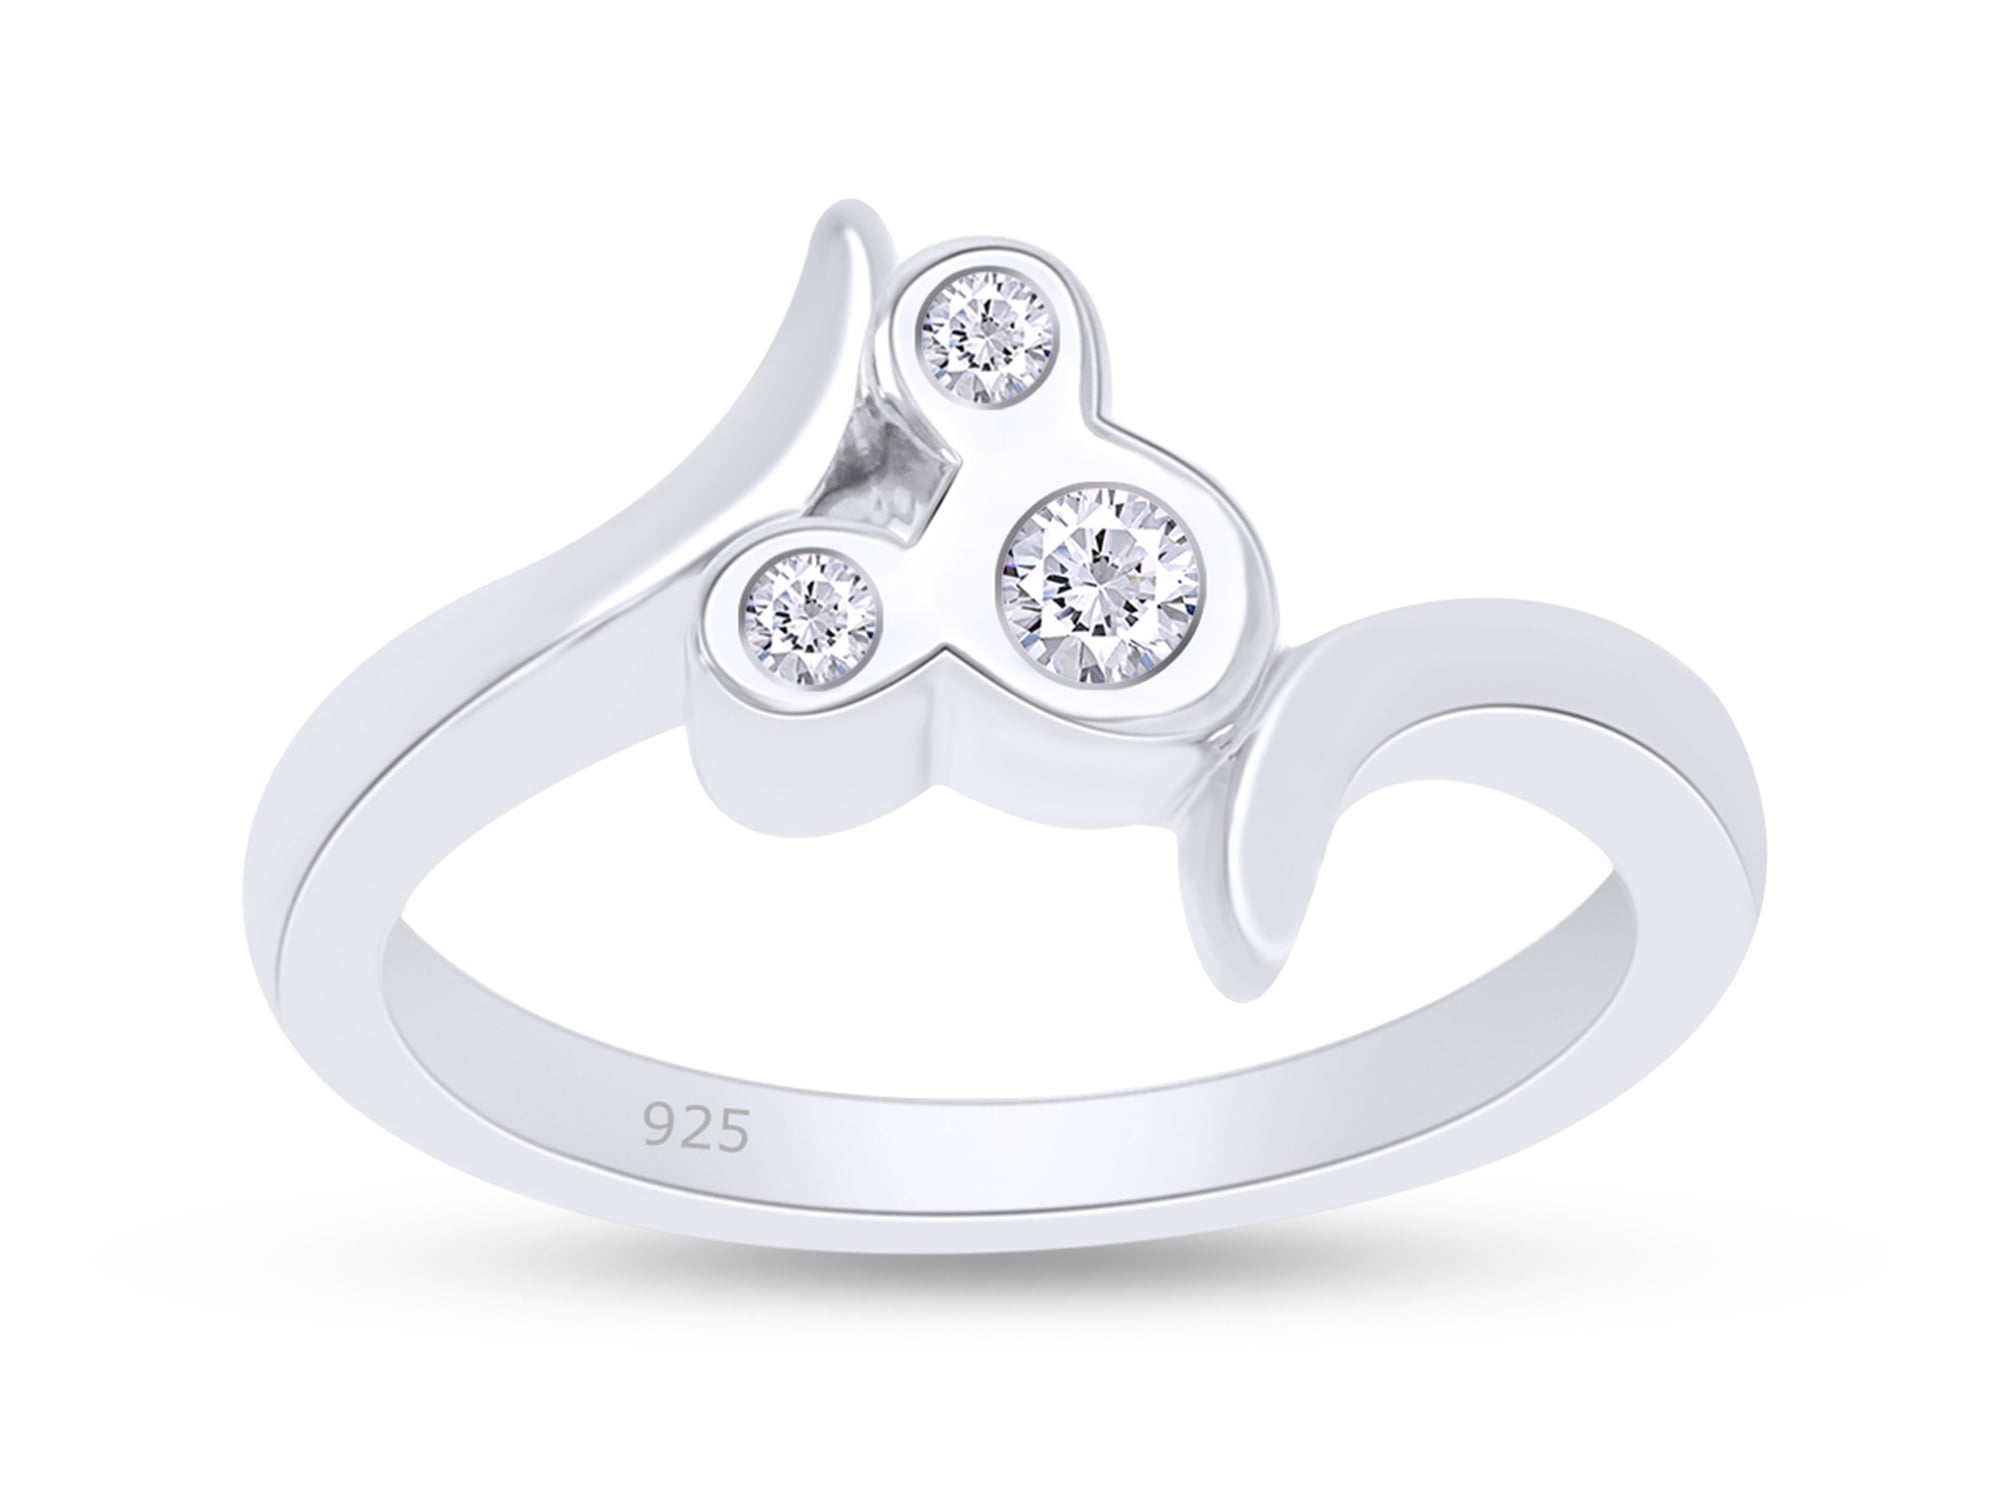 Mickey Mouse Adjustable Initial Ring 14K White Gold Finish Disney Diamond Ring 